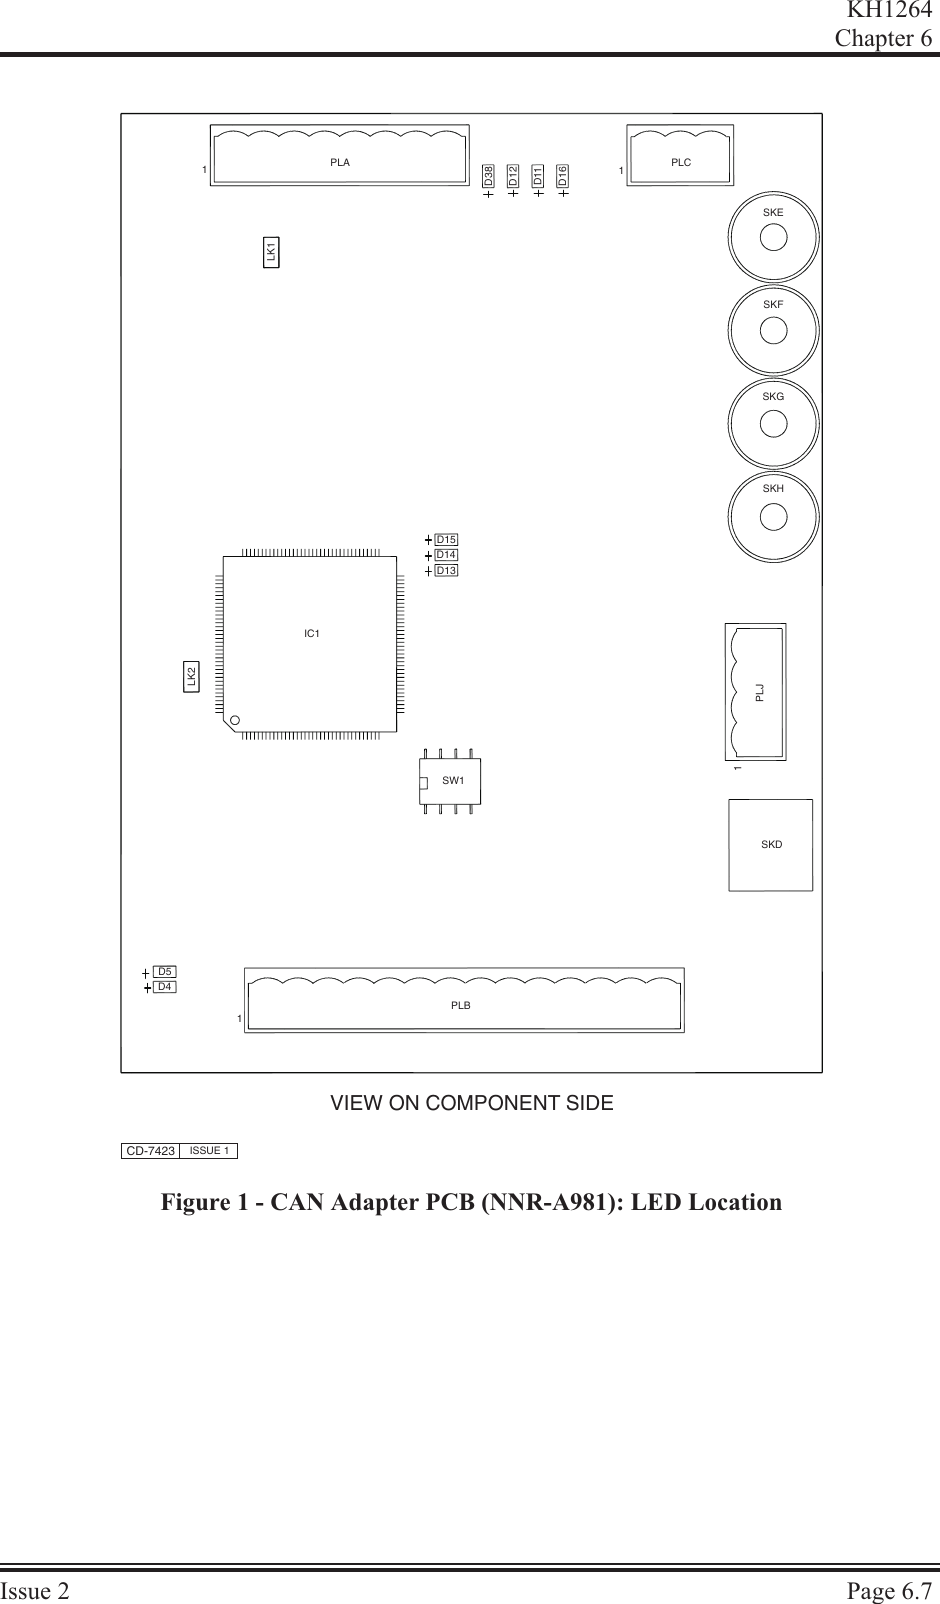 KH1264Chap ter  6Is sue  2 Page  6.7VIEW ON COMPONENT SIDEIC1D15D14D13LK2SW1PLB1D5D4D38D12D11D16PLA PLC1SKESKFSKGSKHPLJ1SKDLK11CD-7423 ISSUE 1Figure 1 - CAN Adapter PCB (NNR-A981): LED Location